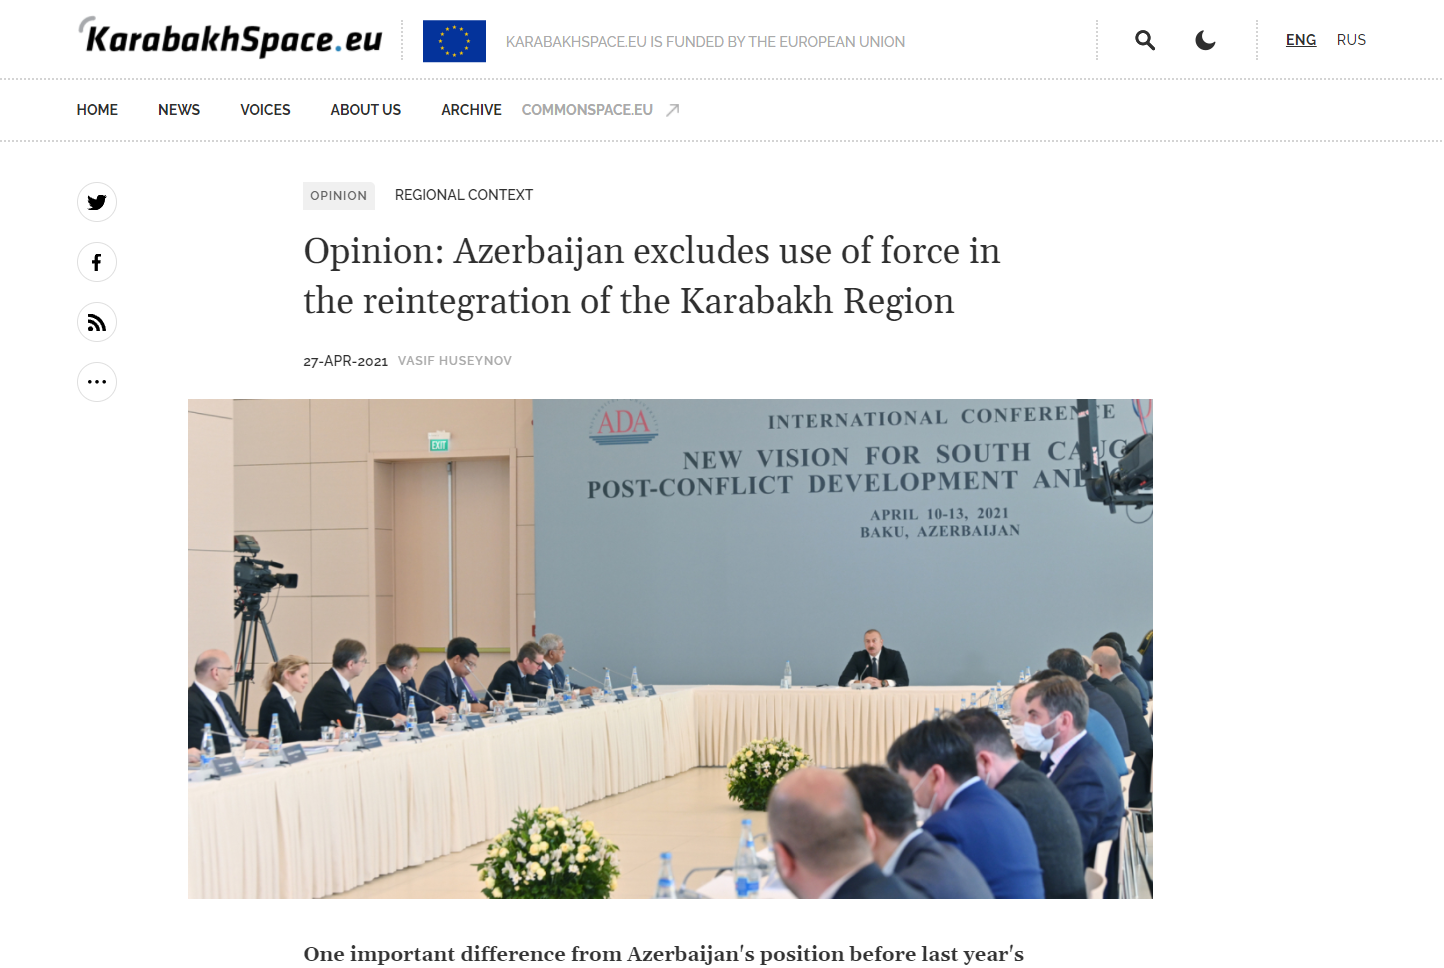 Opinion: Azerbaijan excludes use of force in the reintegration of the Karabakh Region